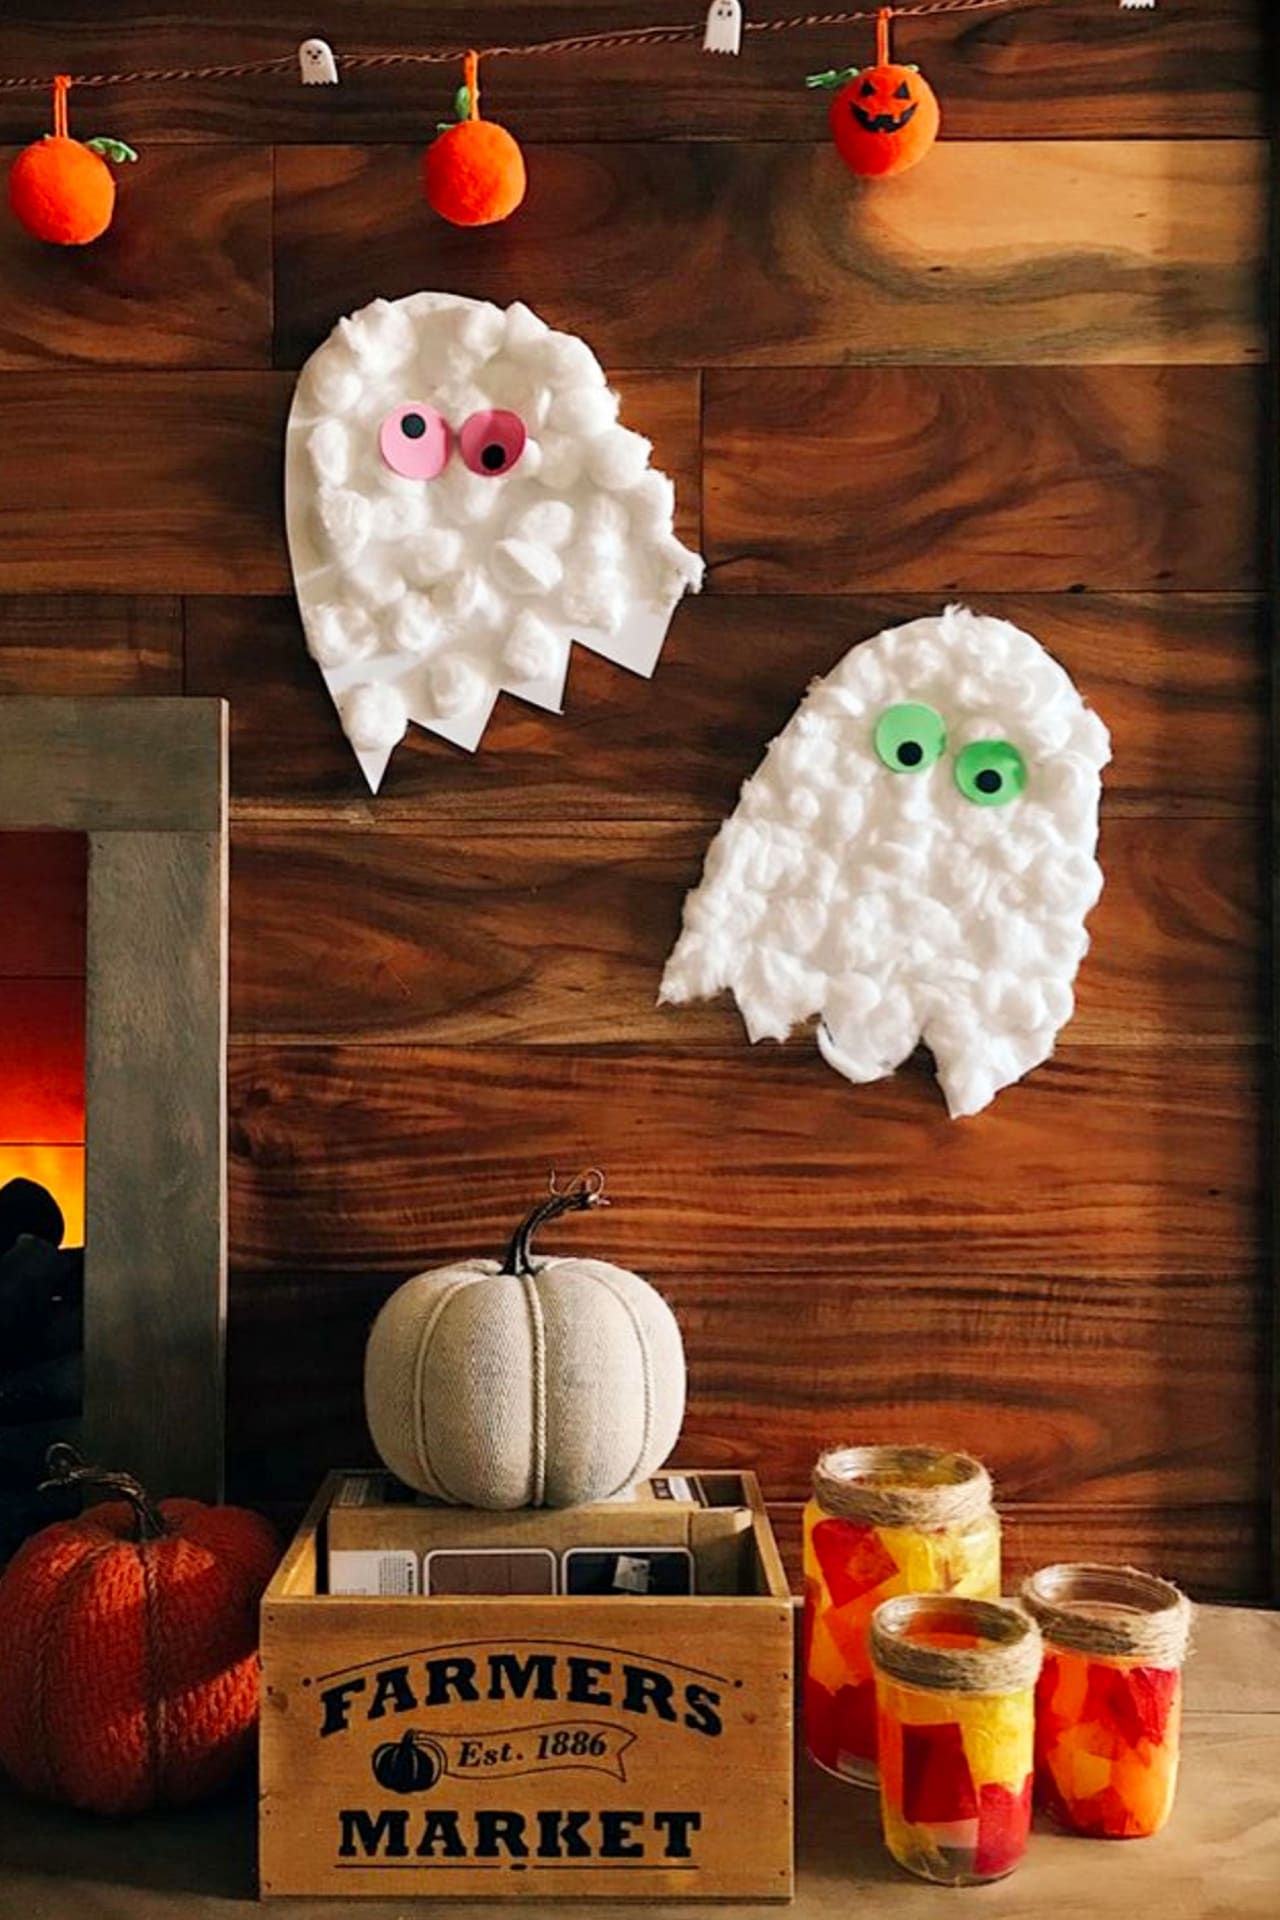 Easy Halloween crafts for toddlers to make - preschool crafts and art projects for Fall, Autumn and Halloween